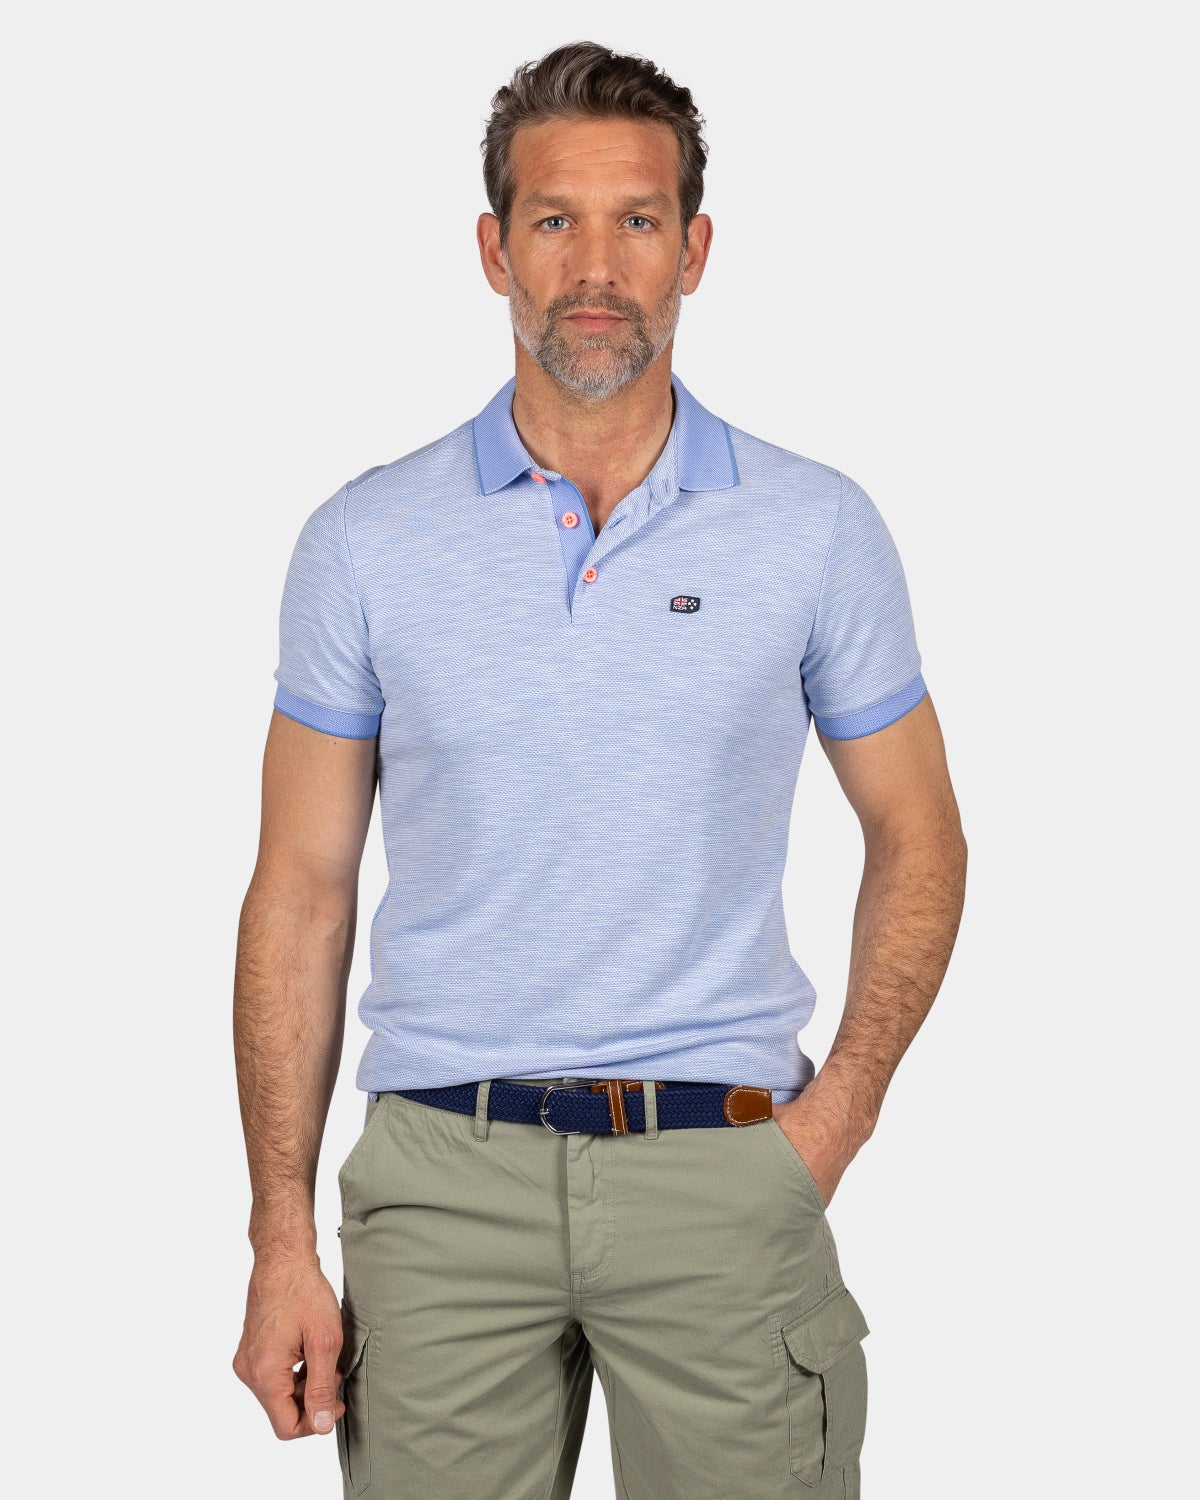 Plain polo made of durable material - Bed Blue